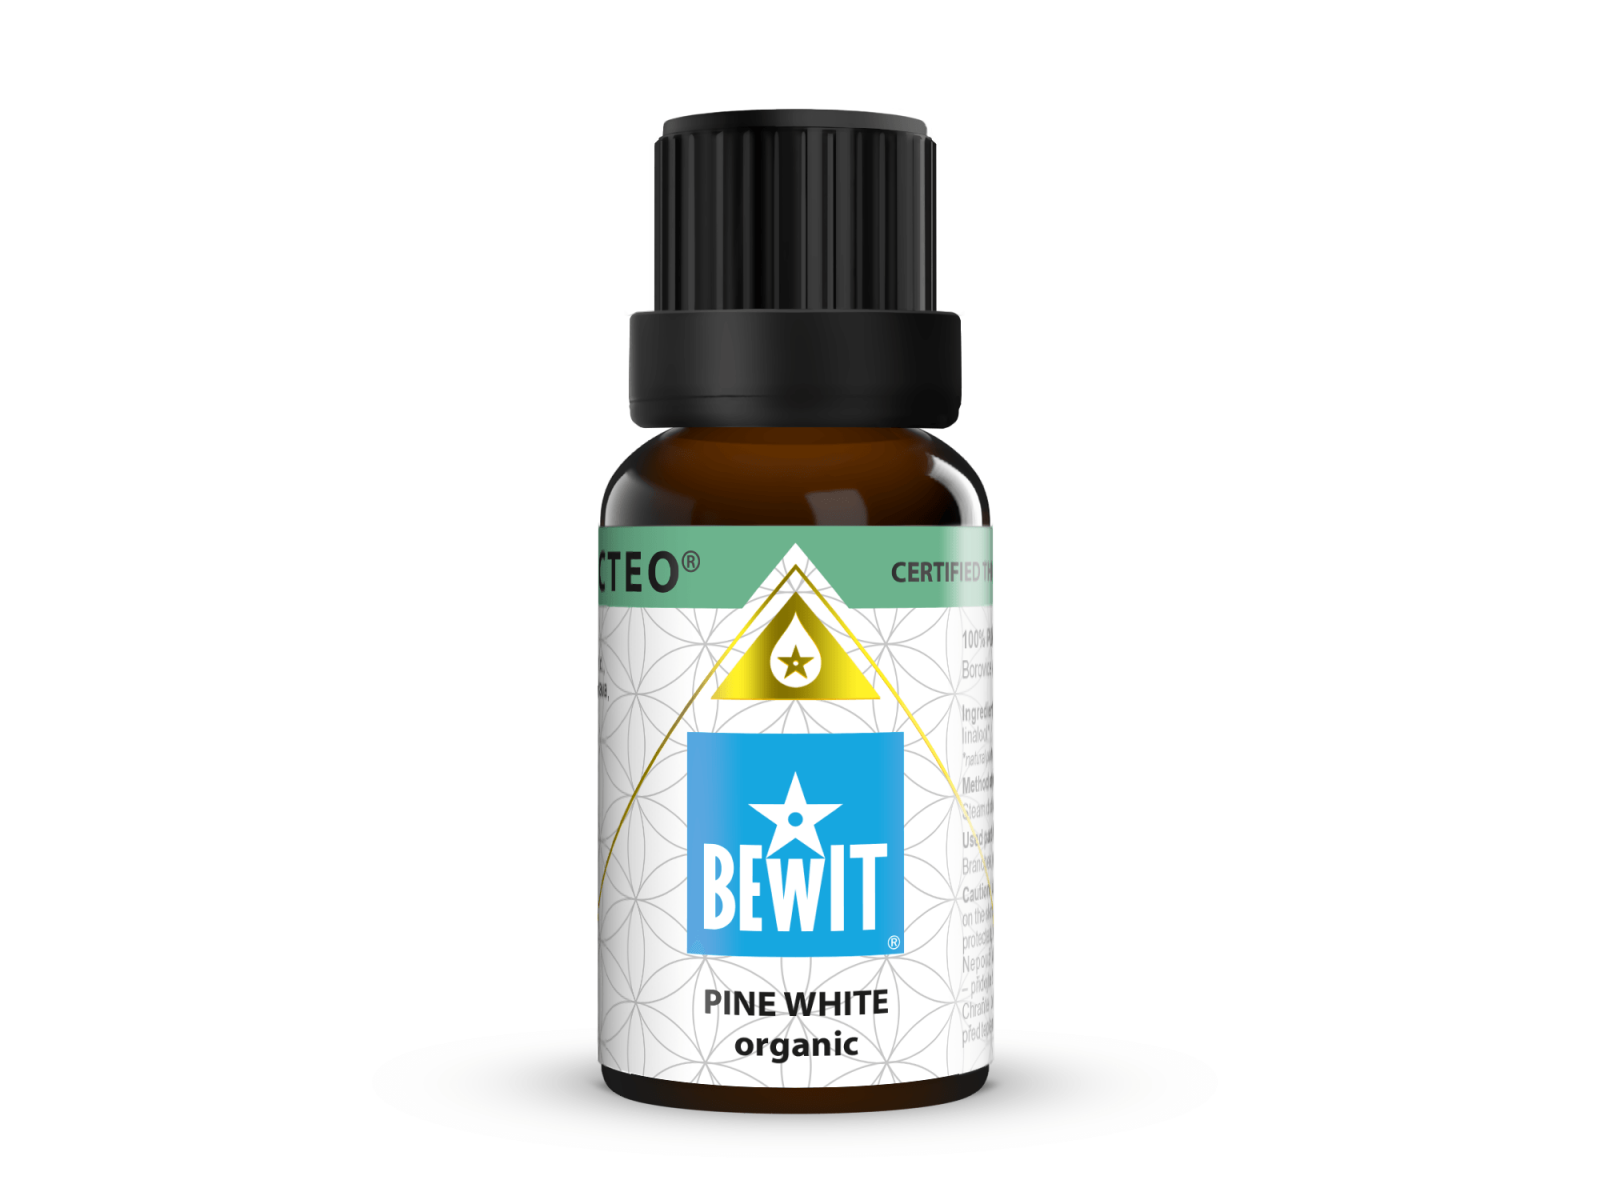 BEWIT Pine Weymouth Organic - 100% pure and natural CTEO® essential oil - 3